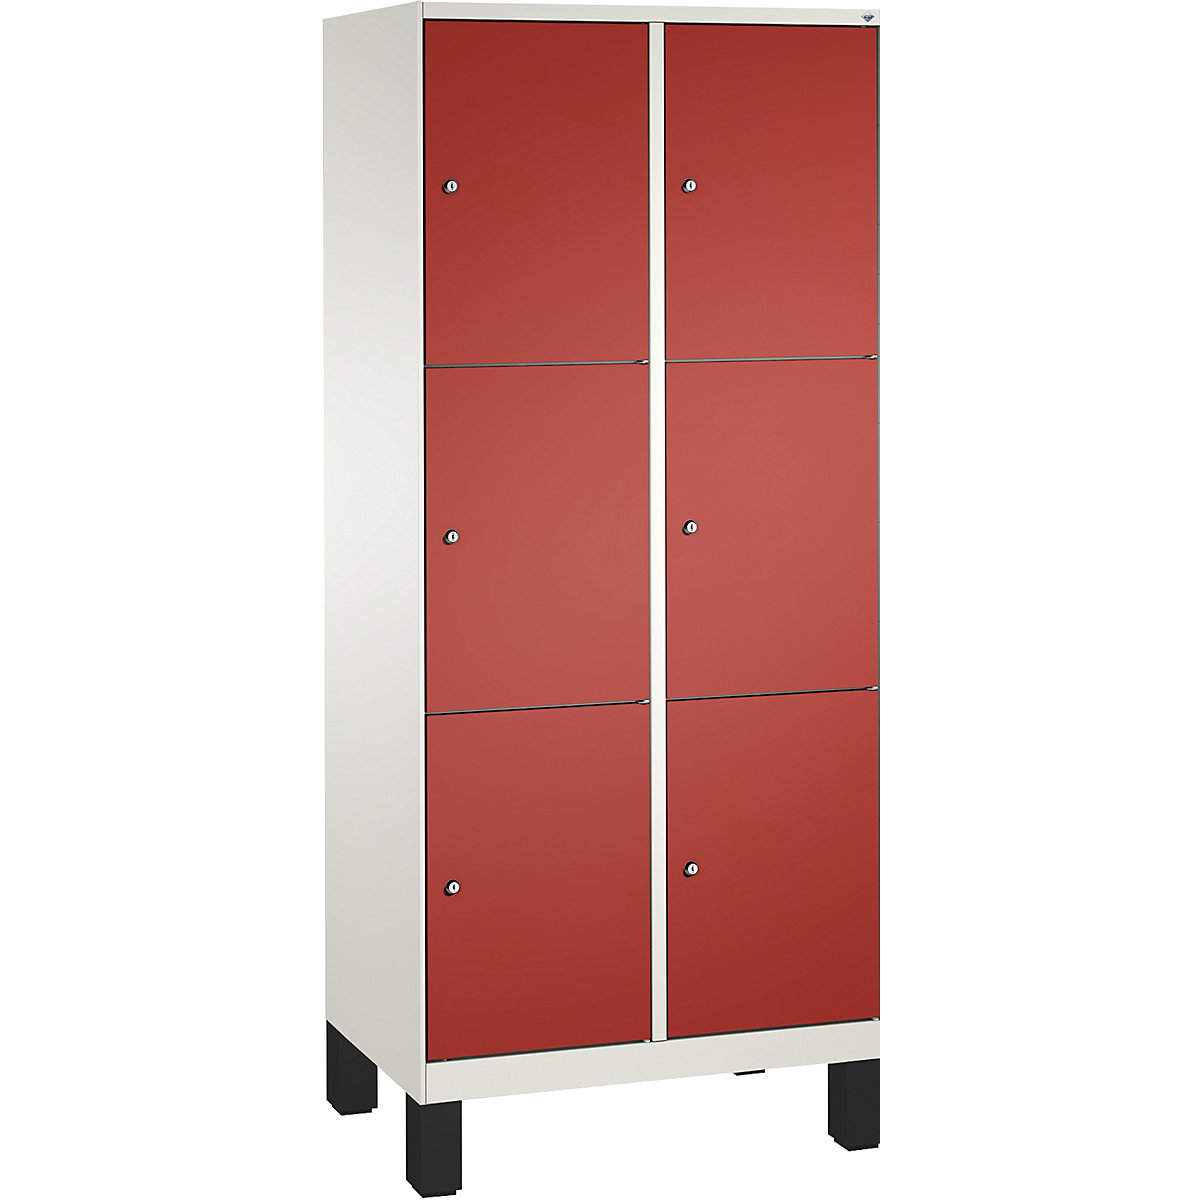 EVOLO locker unit, with feet – C+P, 2 compartments, 3 shelf compartments each, compartment width 400 mm, traffic white / flame red